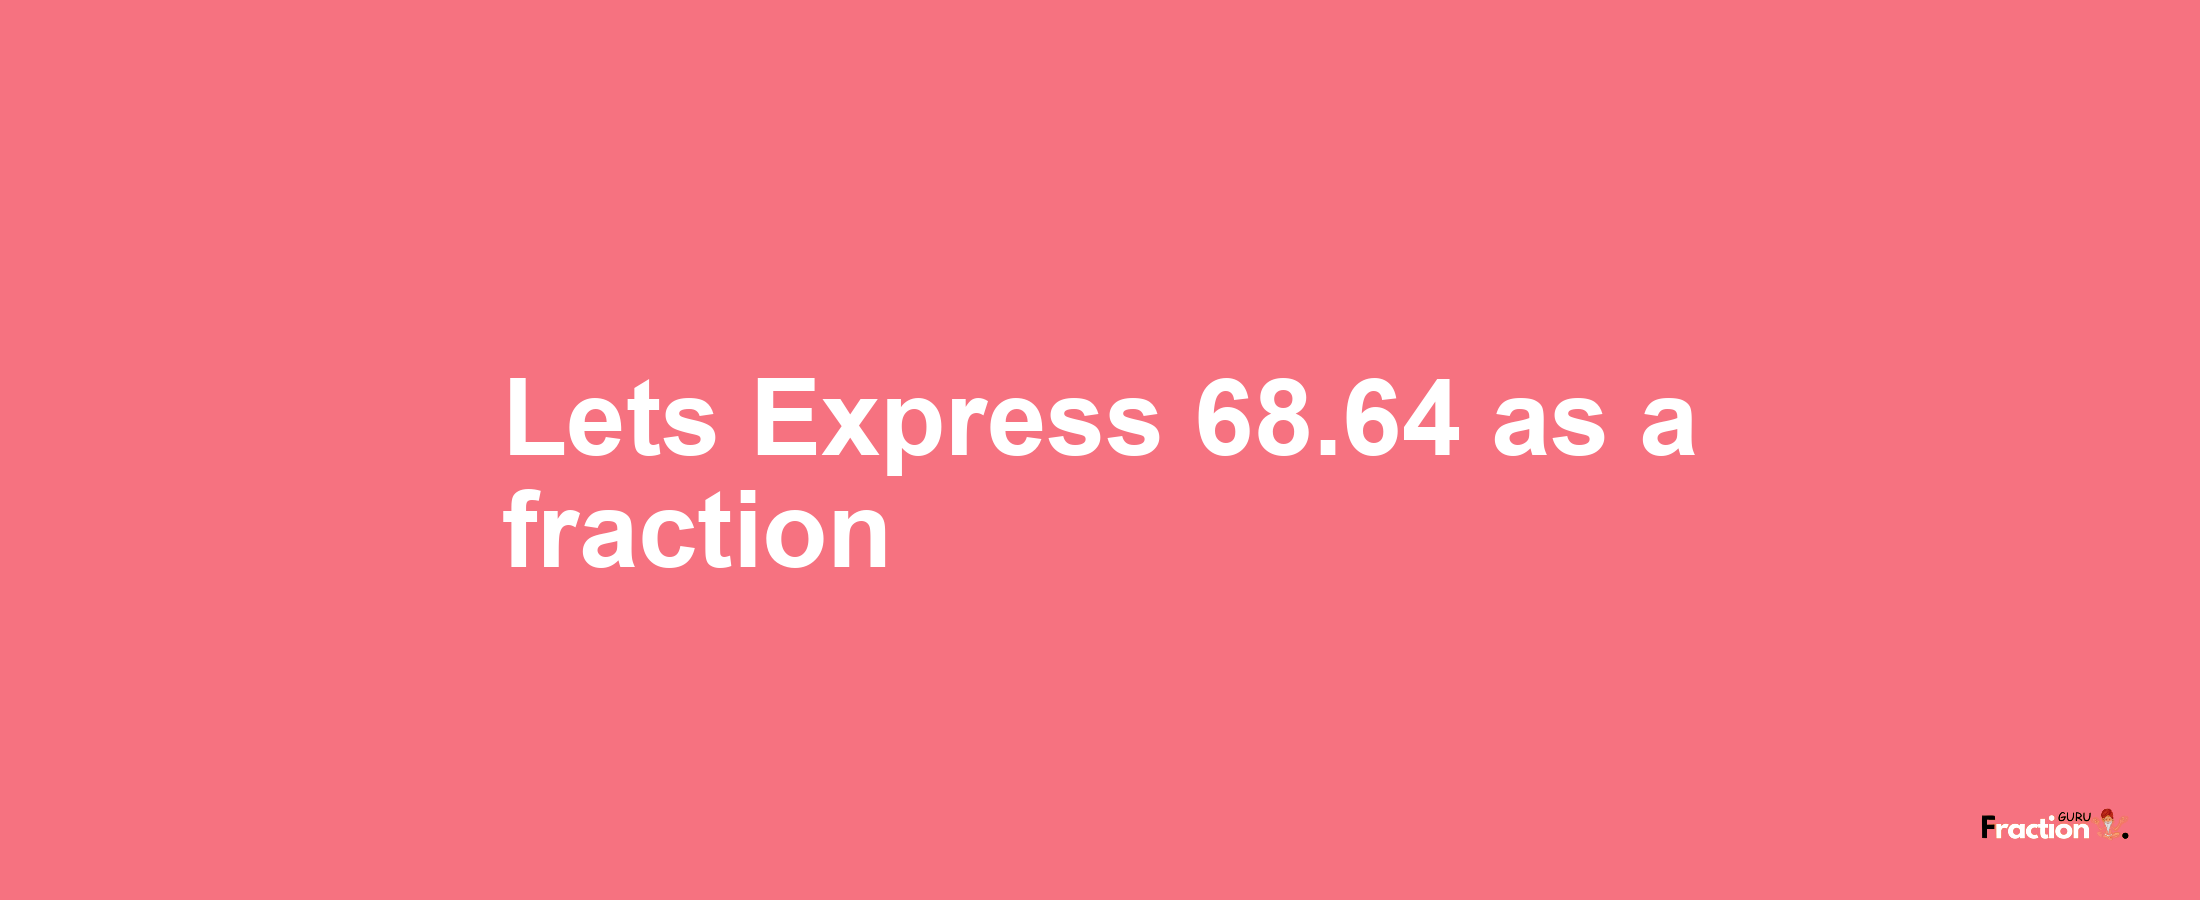 Lets Express 68.64 as afraction